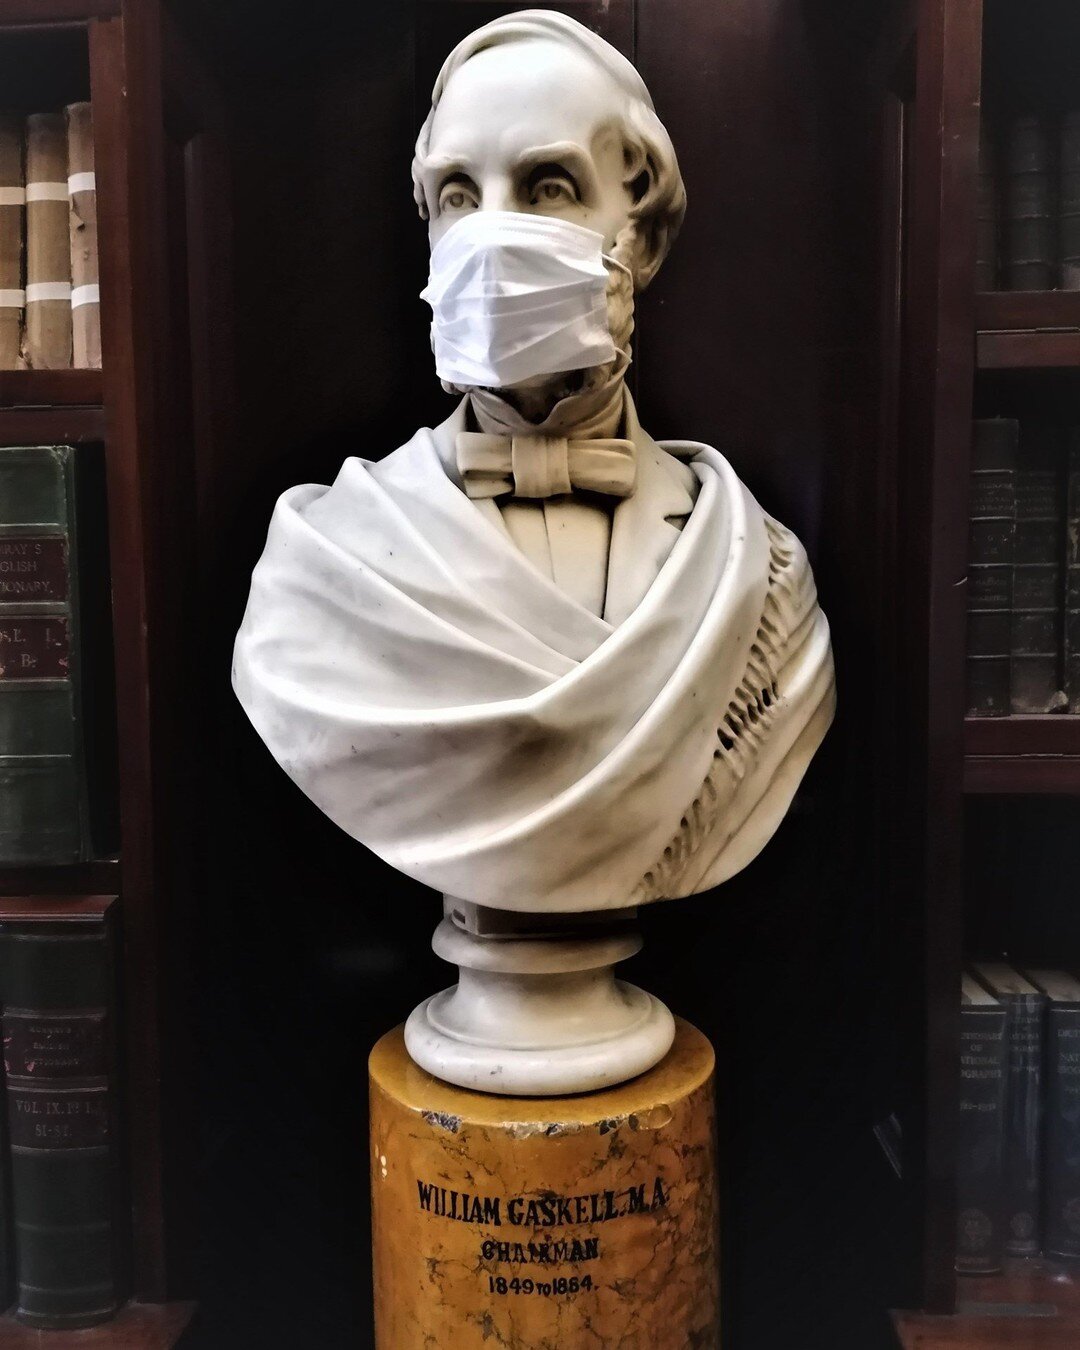 On Monday 19th July, government guidelines on #Covid measures will change. At the Portico, to help protect vulnerable staff, members and visitors, we will continue to wear masks just like our lovely model, William Gaskell, is doing here. We encourage